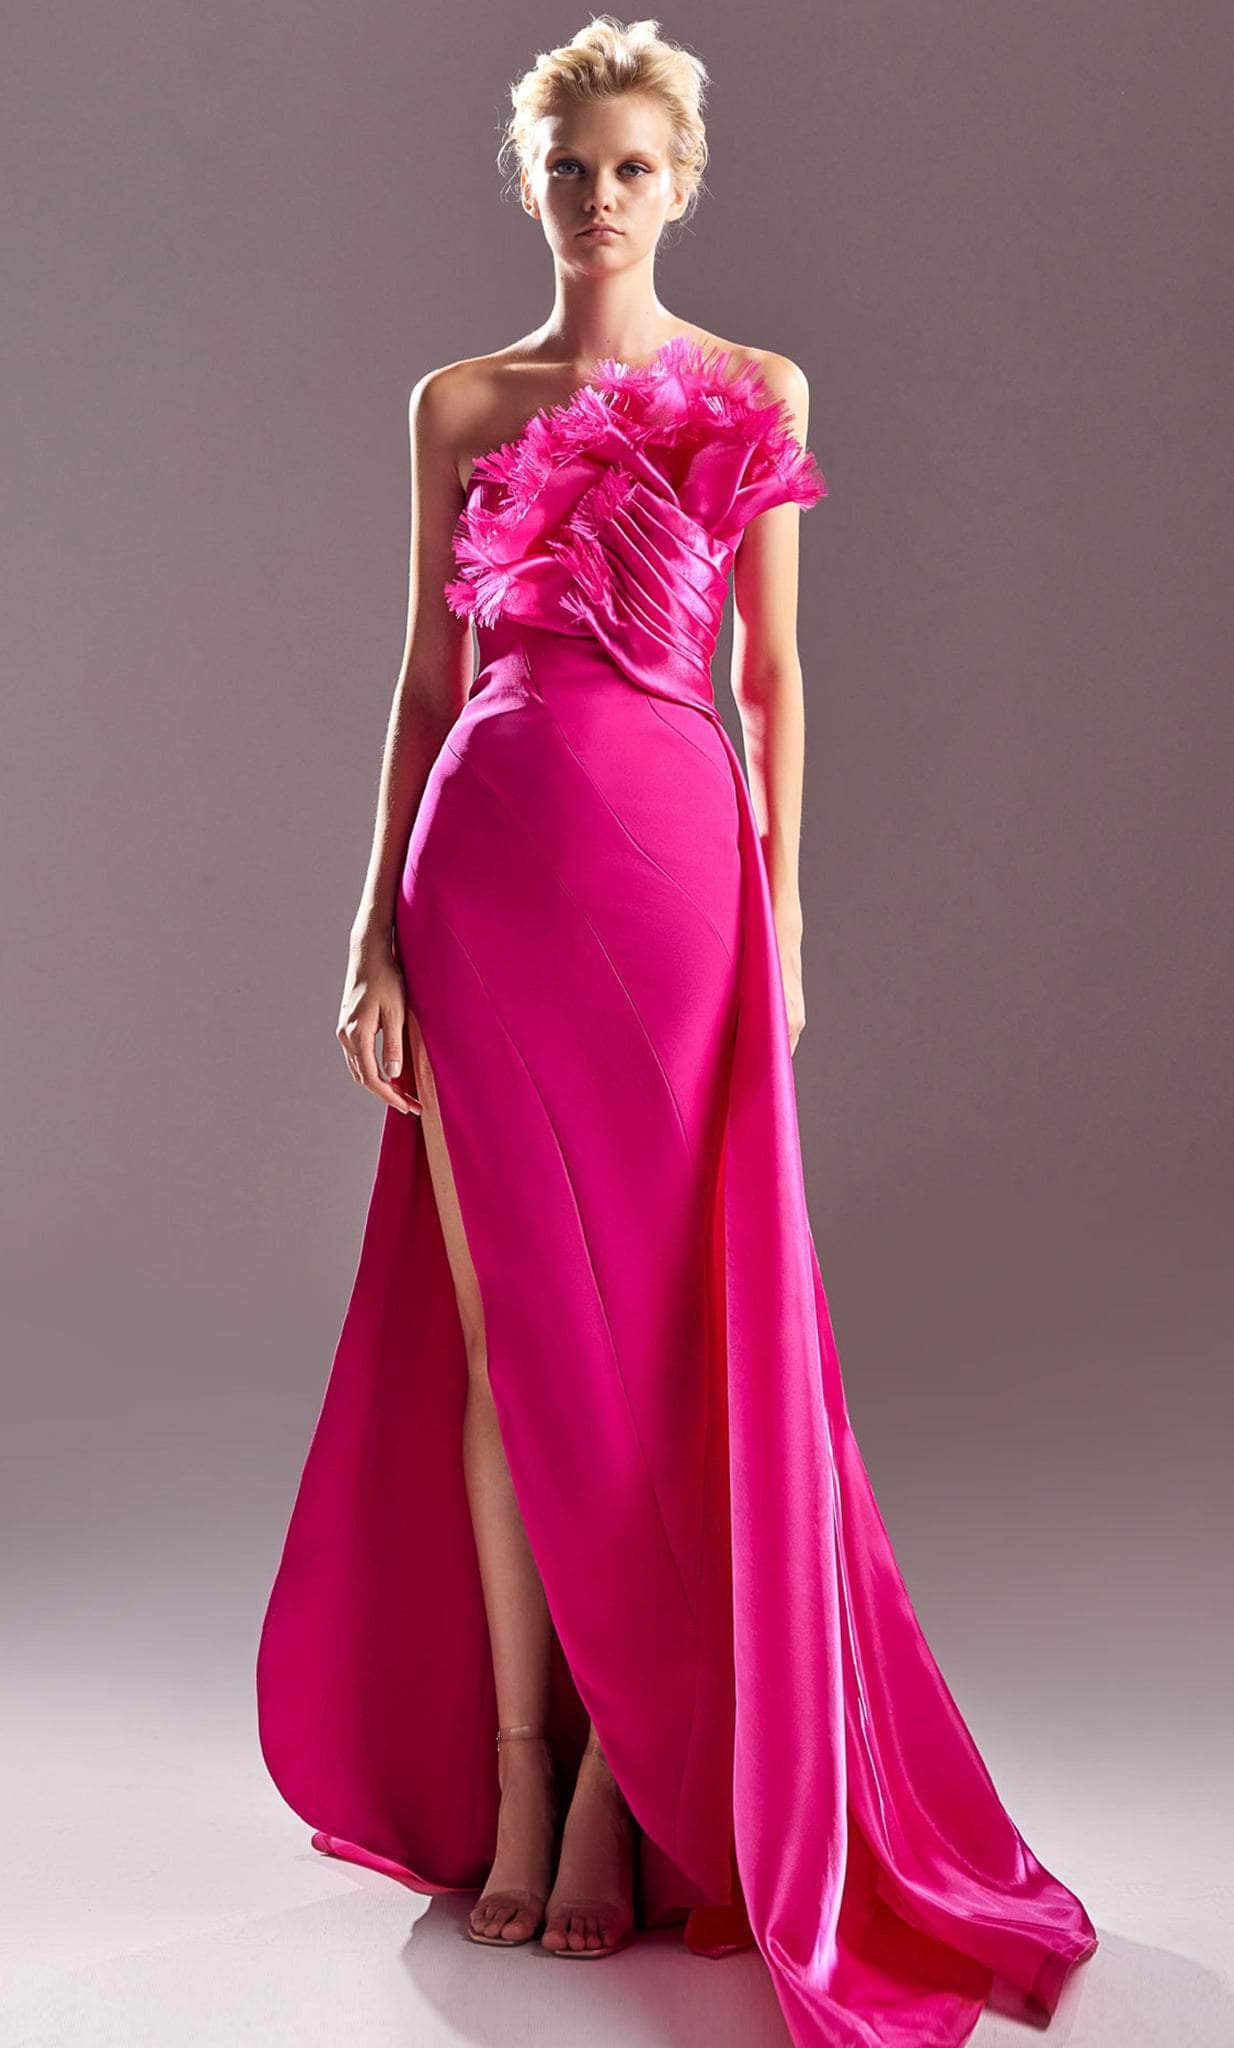 MNM COUTURE G1500 - Strapless Fringed Evening Gown Evening Dresses 0 / Fuchsia